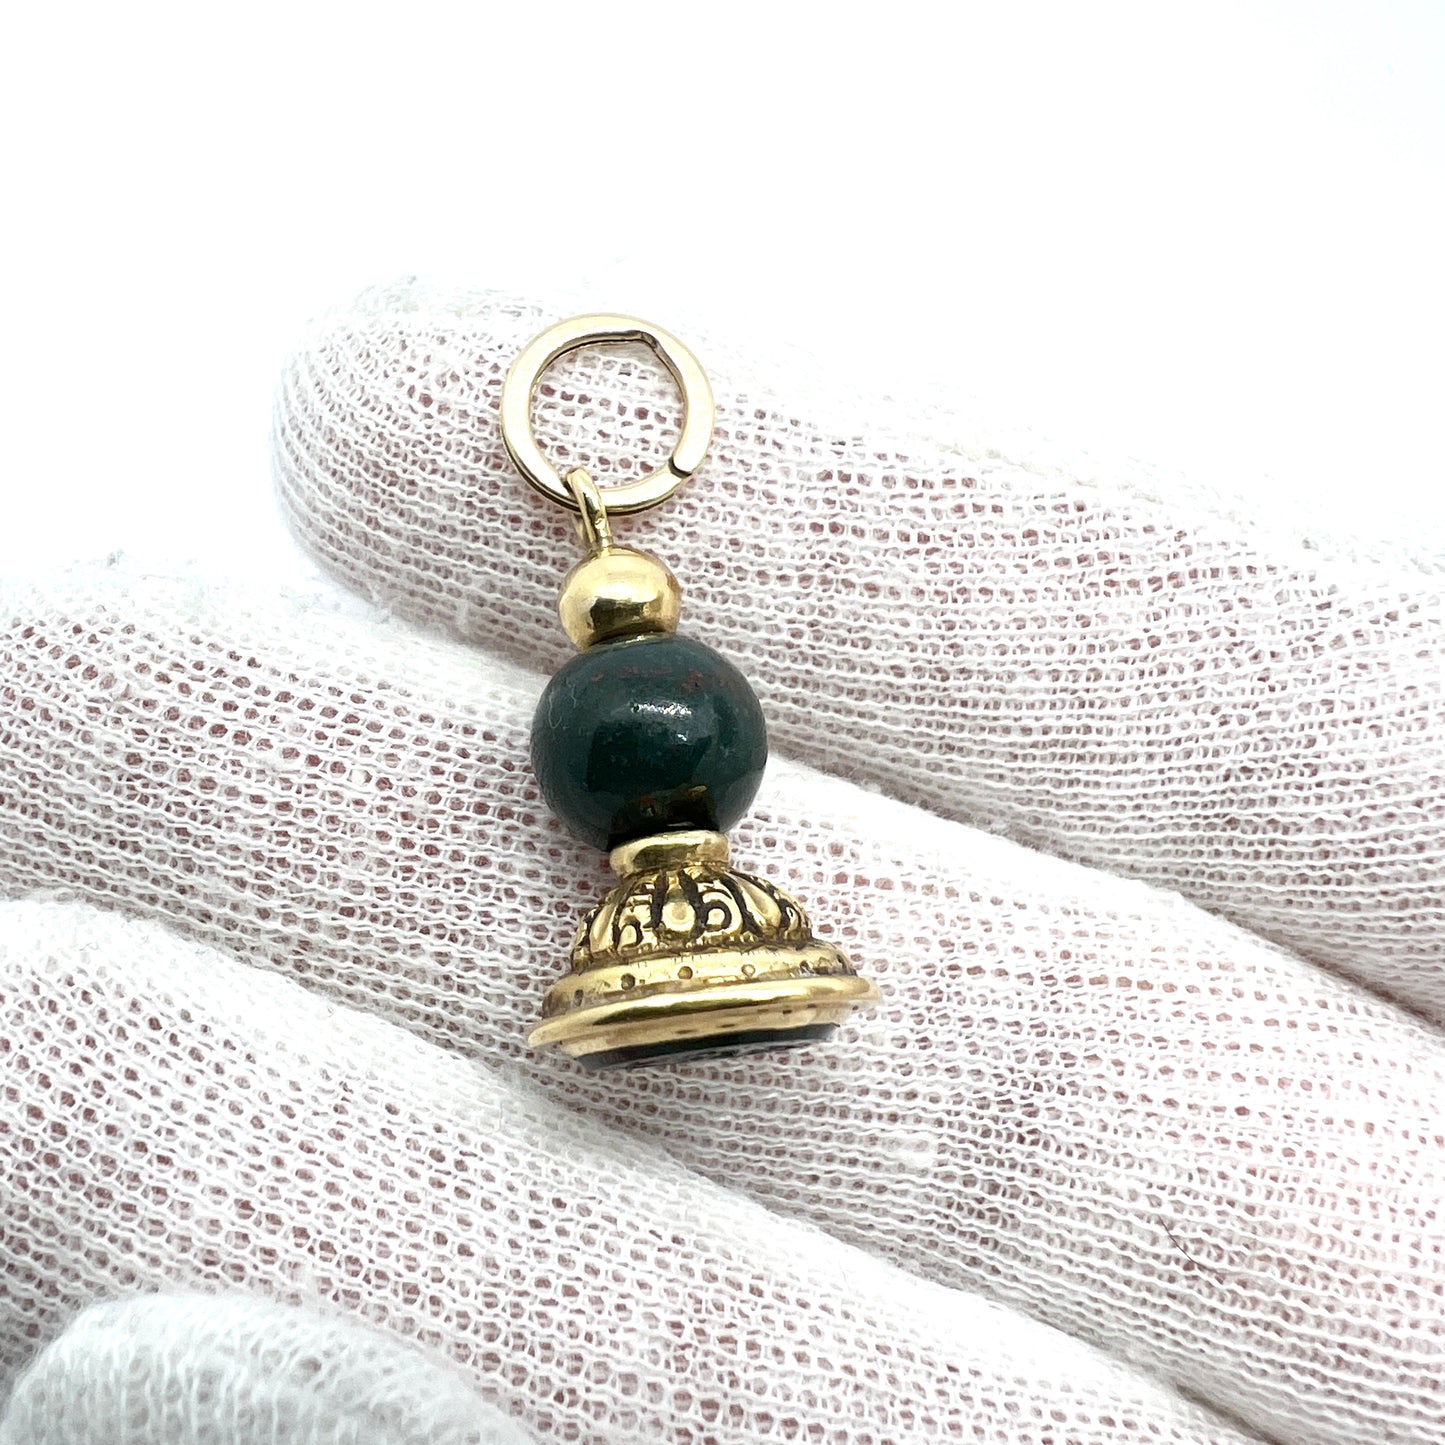 Antique 18k Gold Bloodstone Wax Seal Fob Charm Pendant. ST or TS.